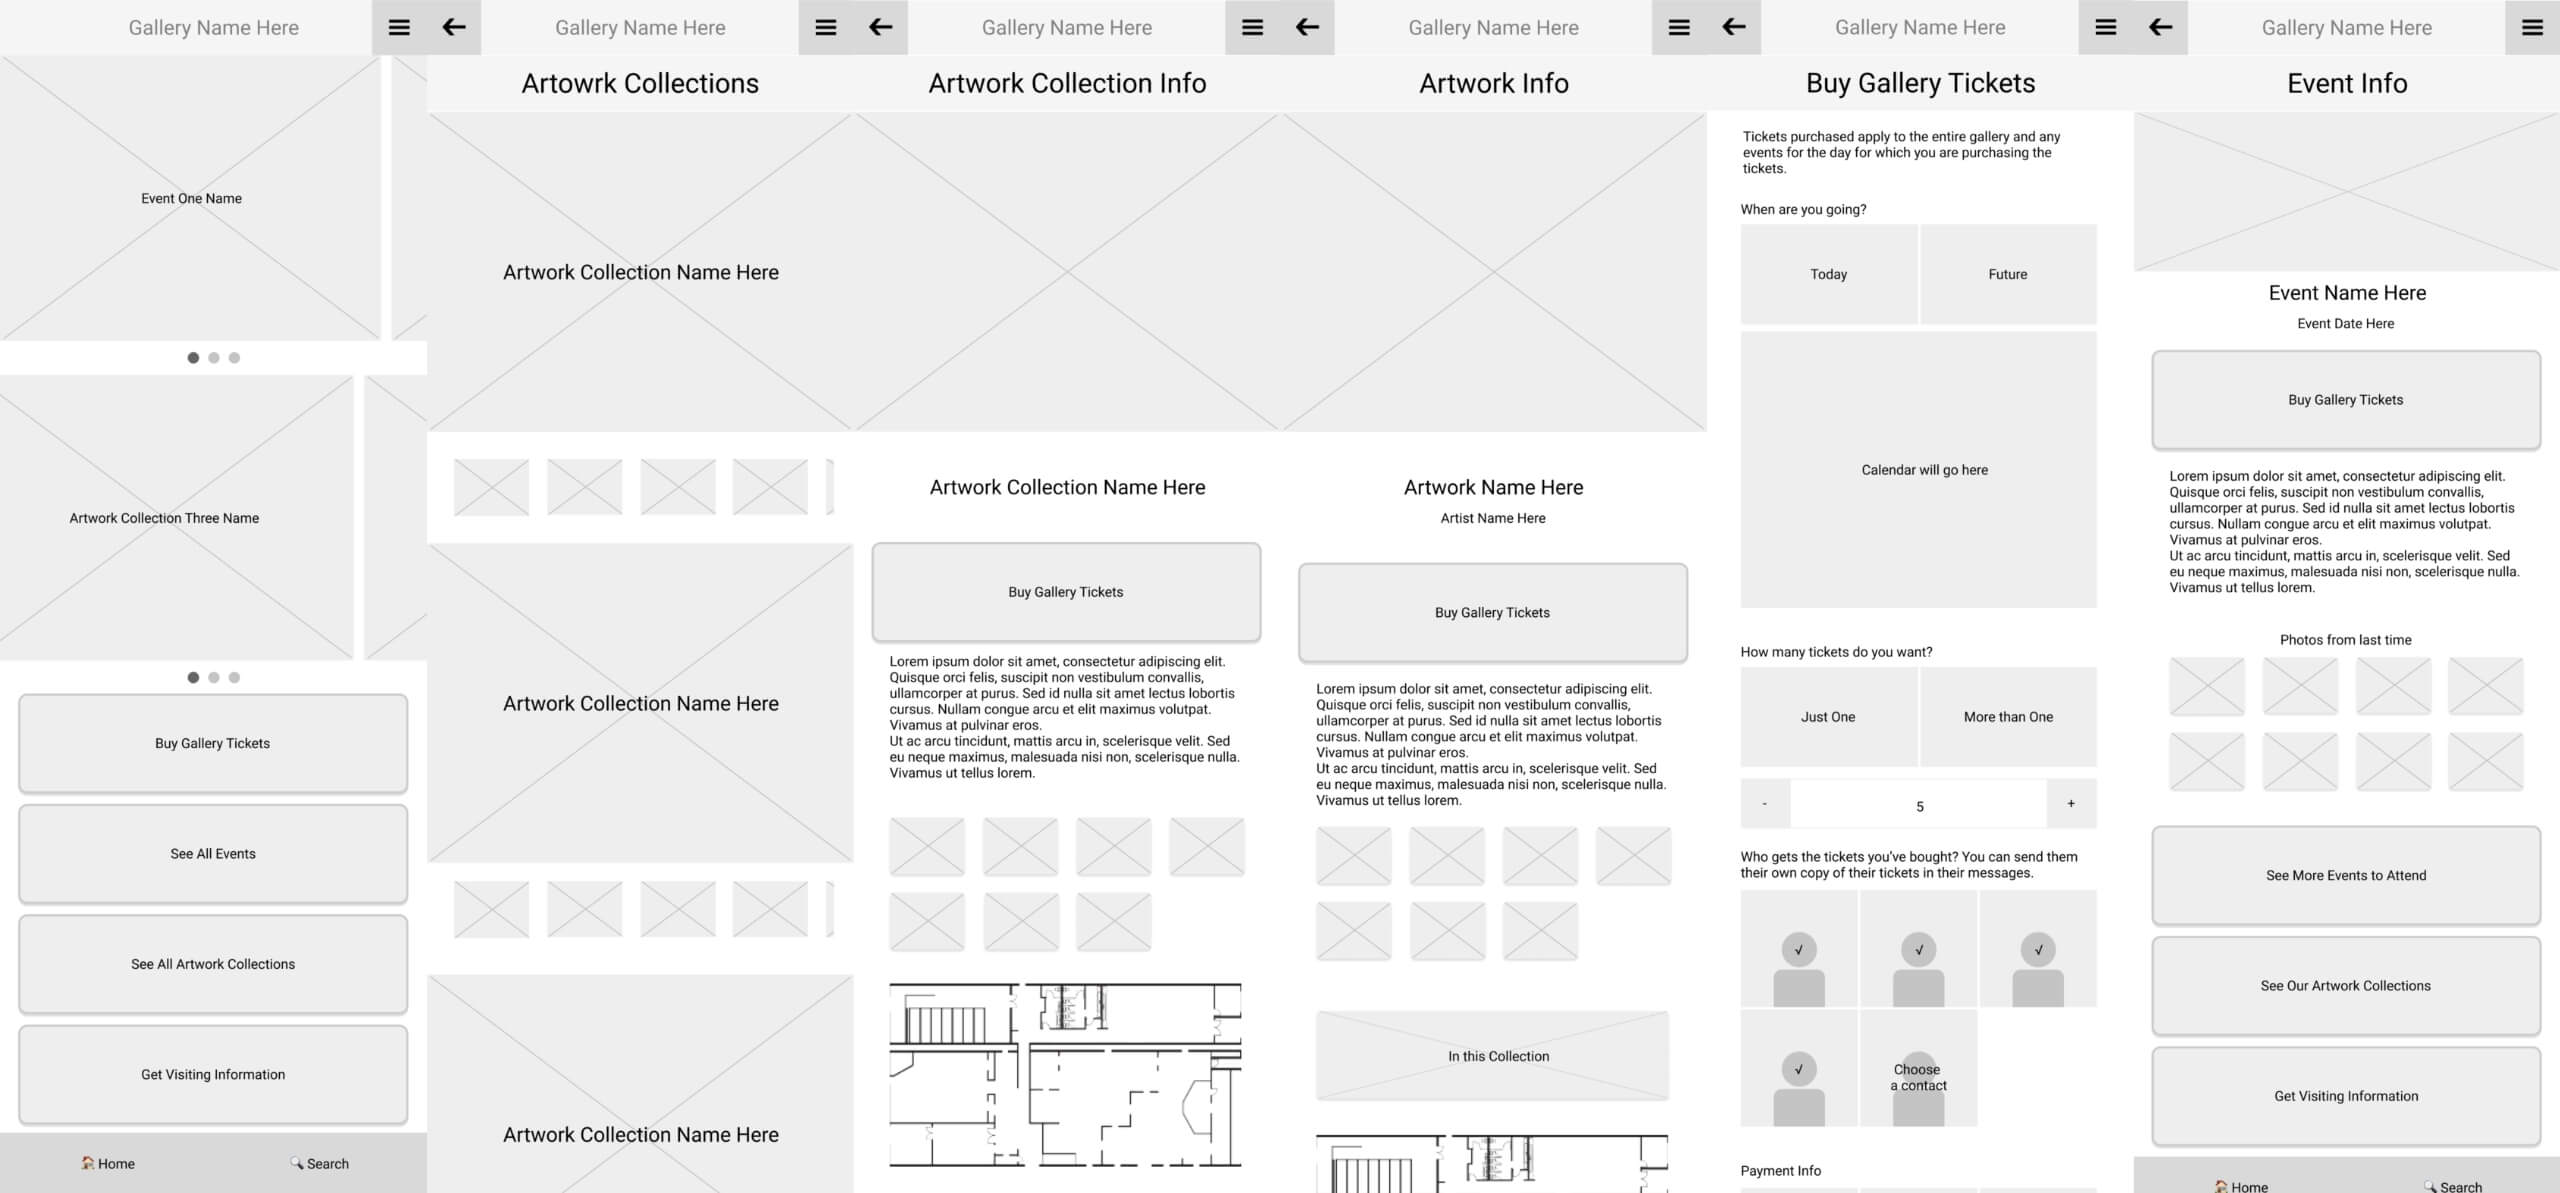 Digital wireframes created from the best concepts from the crazy eight ideations.